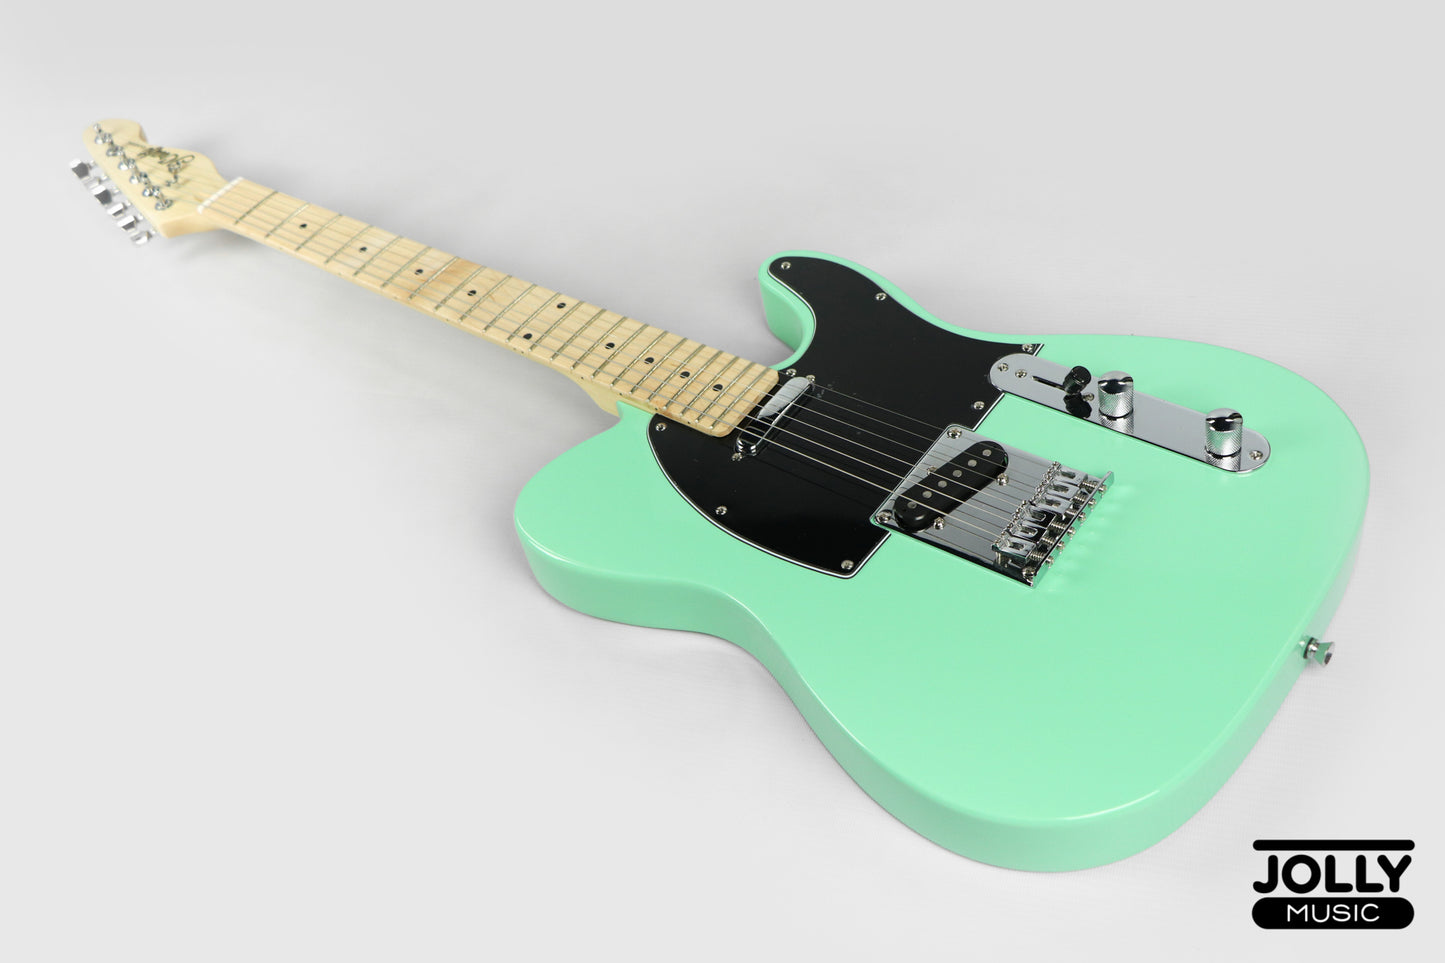 JCraft T-1 T-Style Electric Guitar with Gigbag - Surf Green